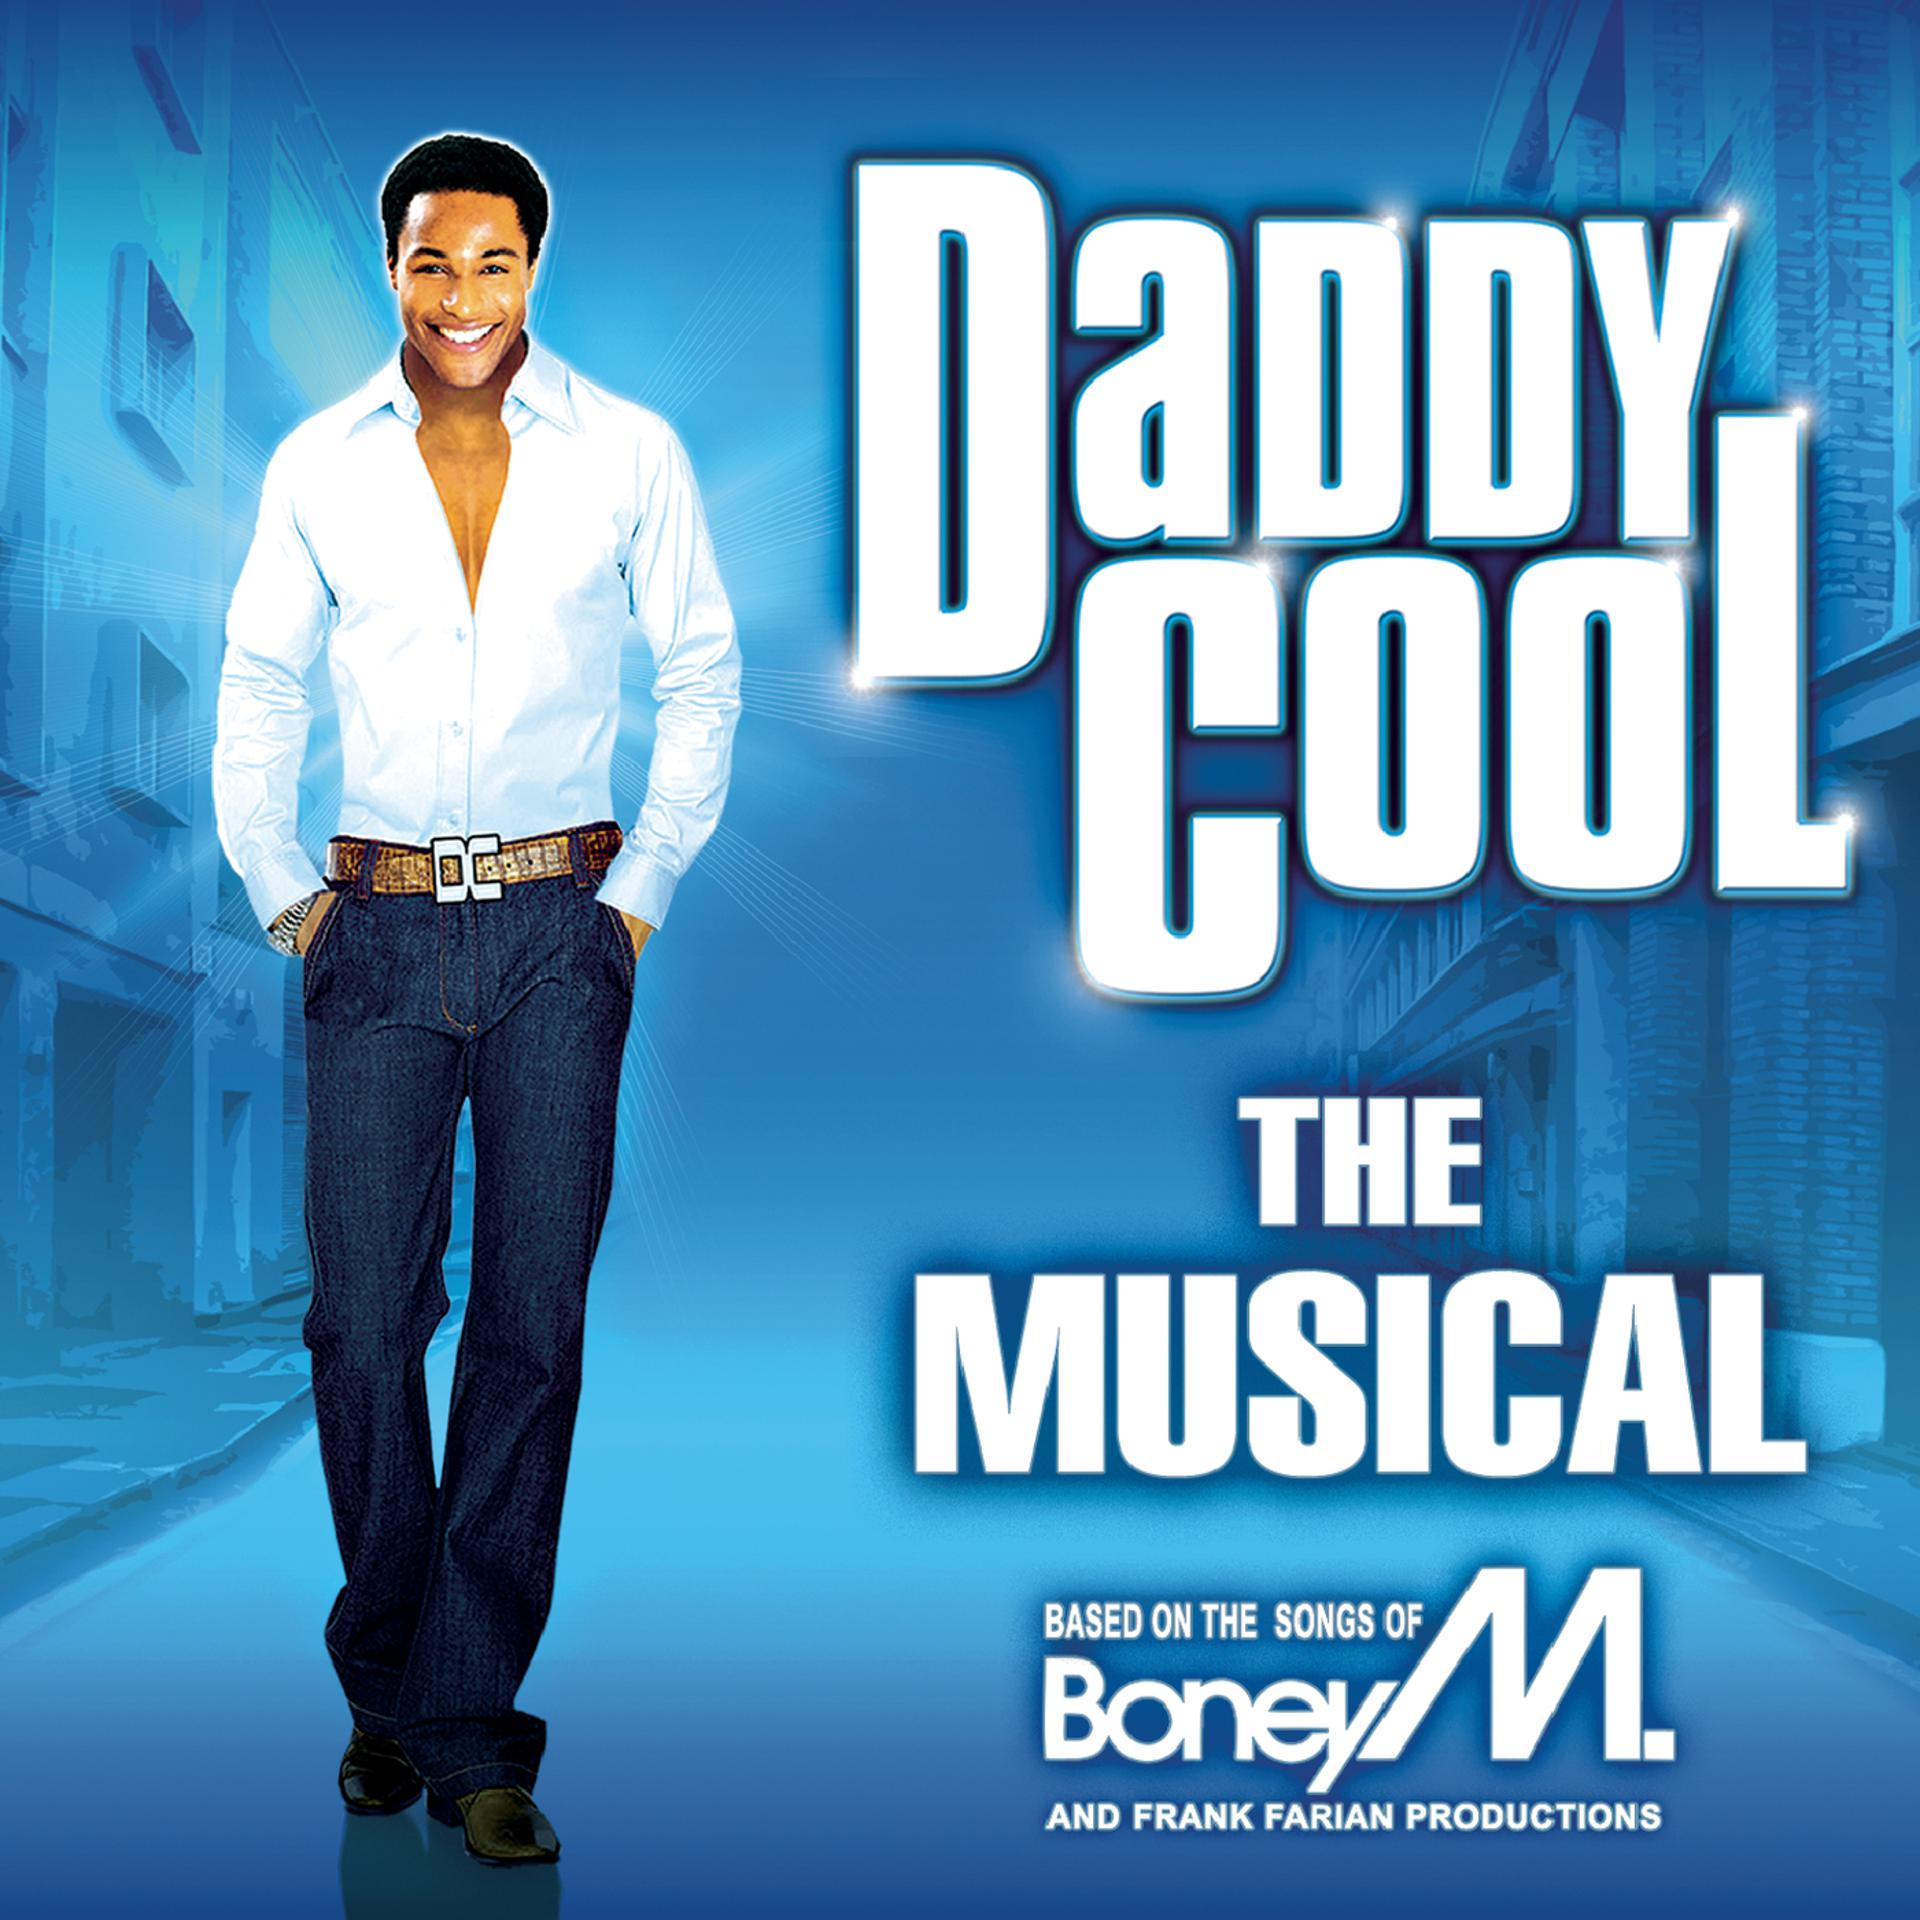 Jt music to the bone. Daddy cool - the Musical. Musical London. The Daddy cool London Musical Cast - Rasputin. Daddy cool картинки.